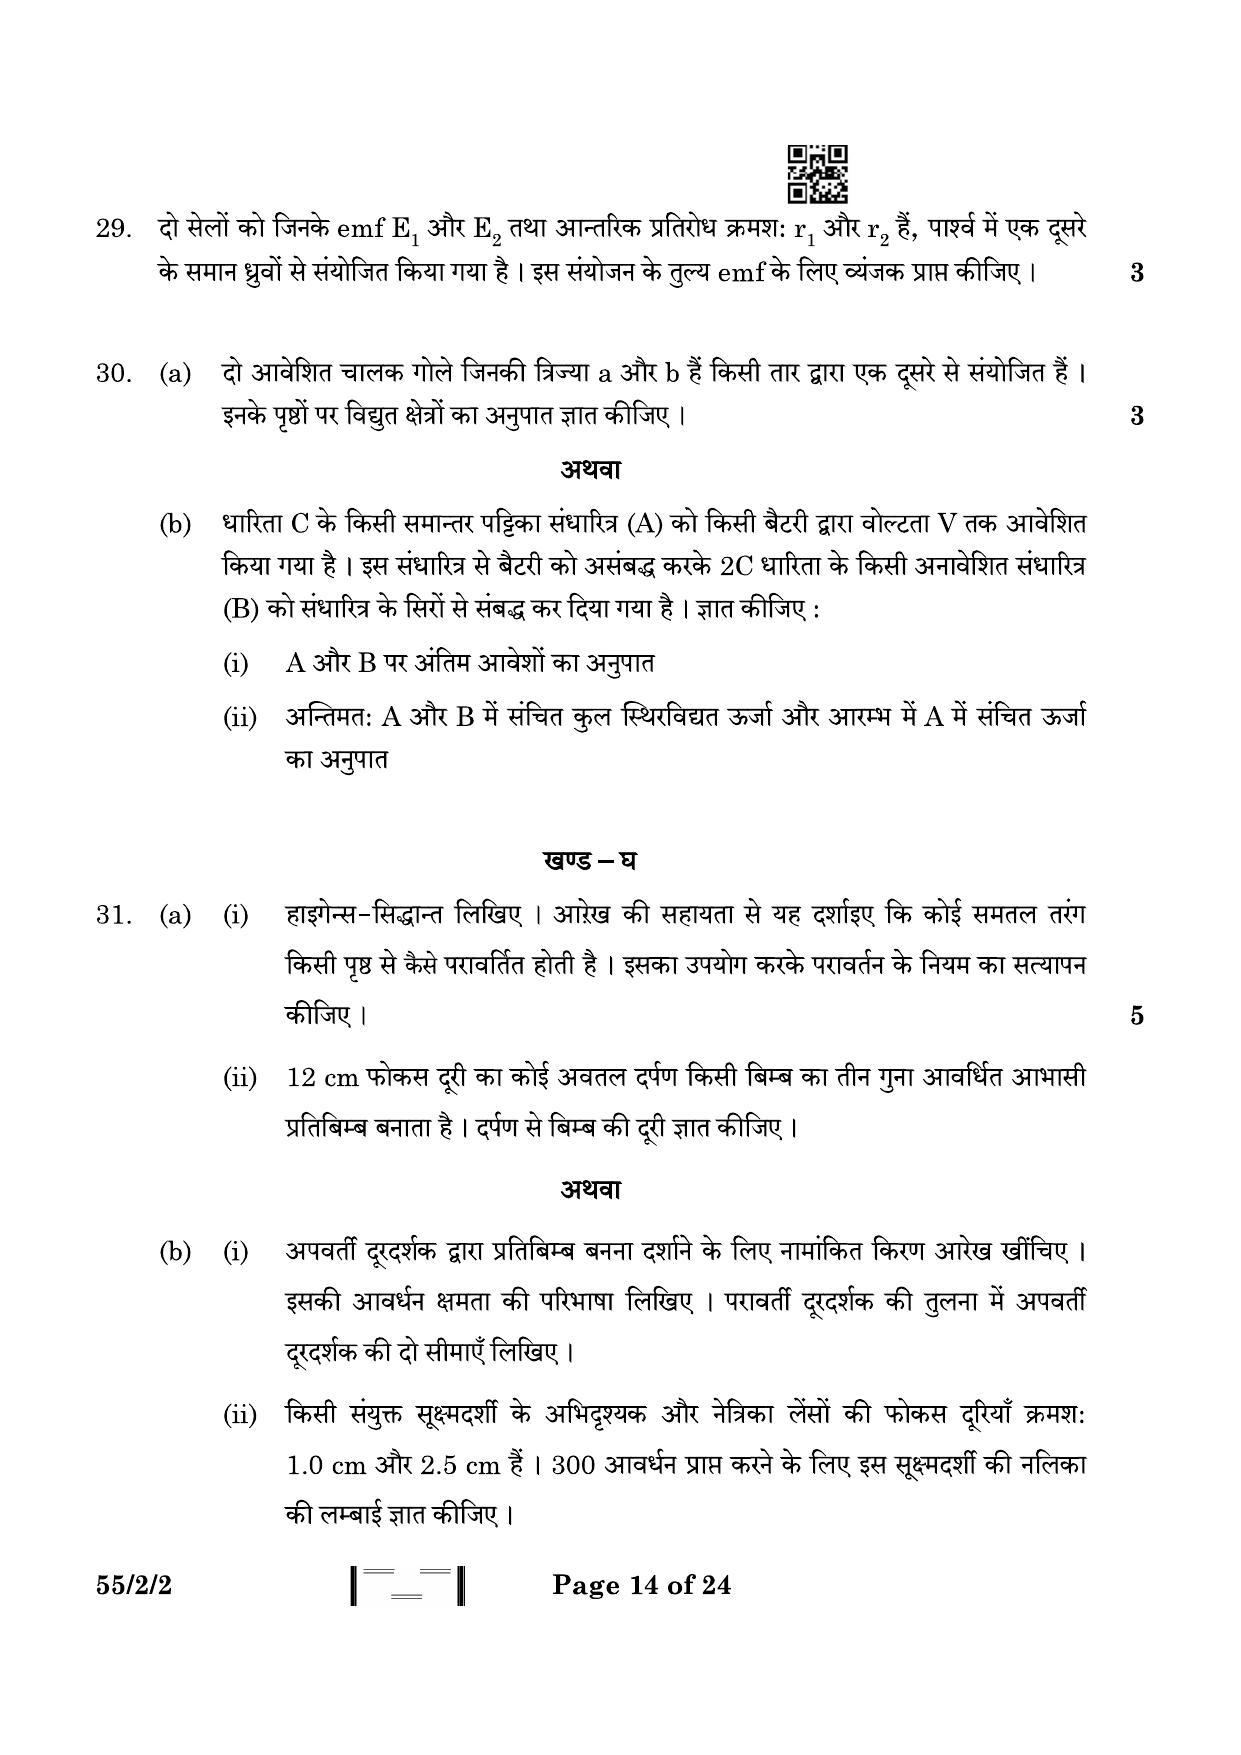 CBSE Class 12 55-2-2 Physics 2023 Question Paper - Page 14